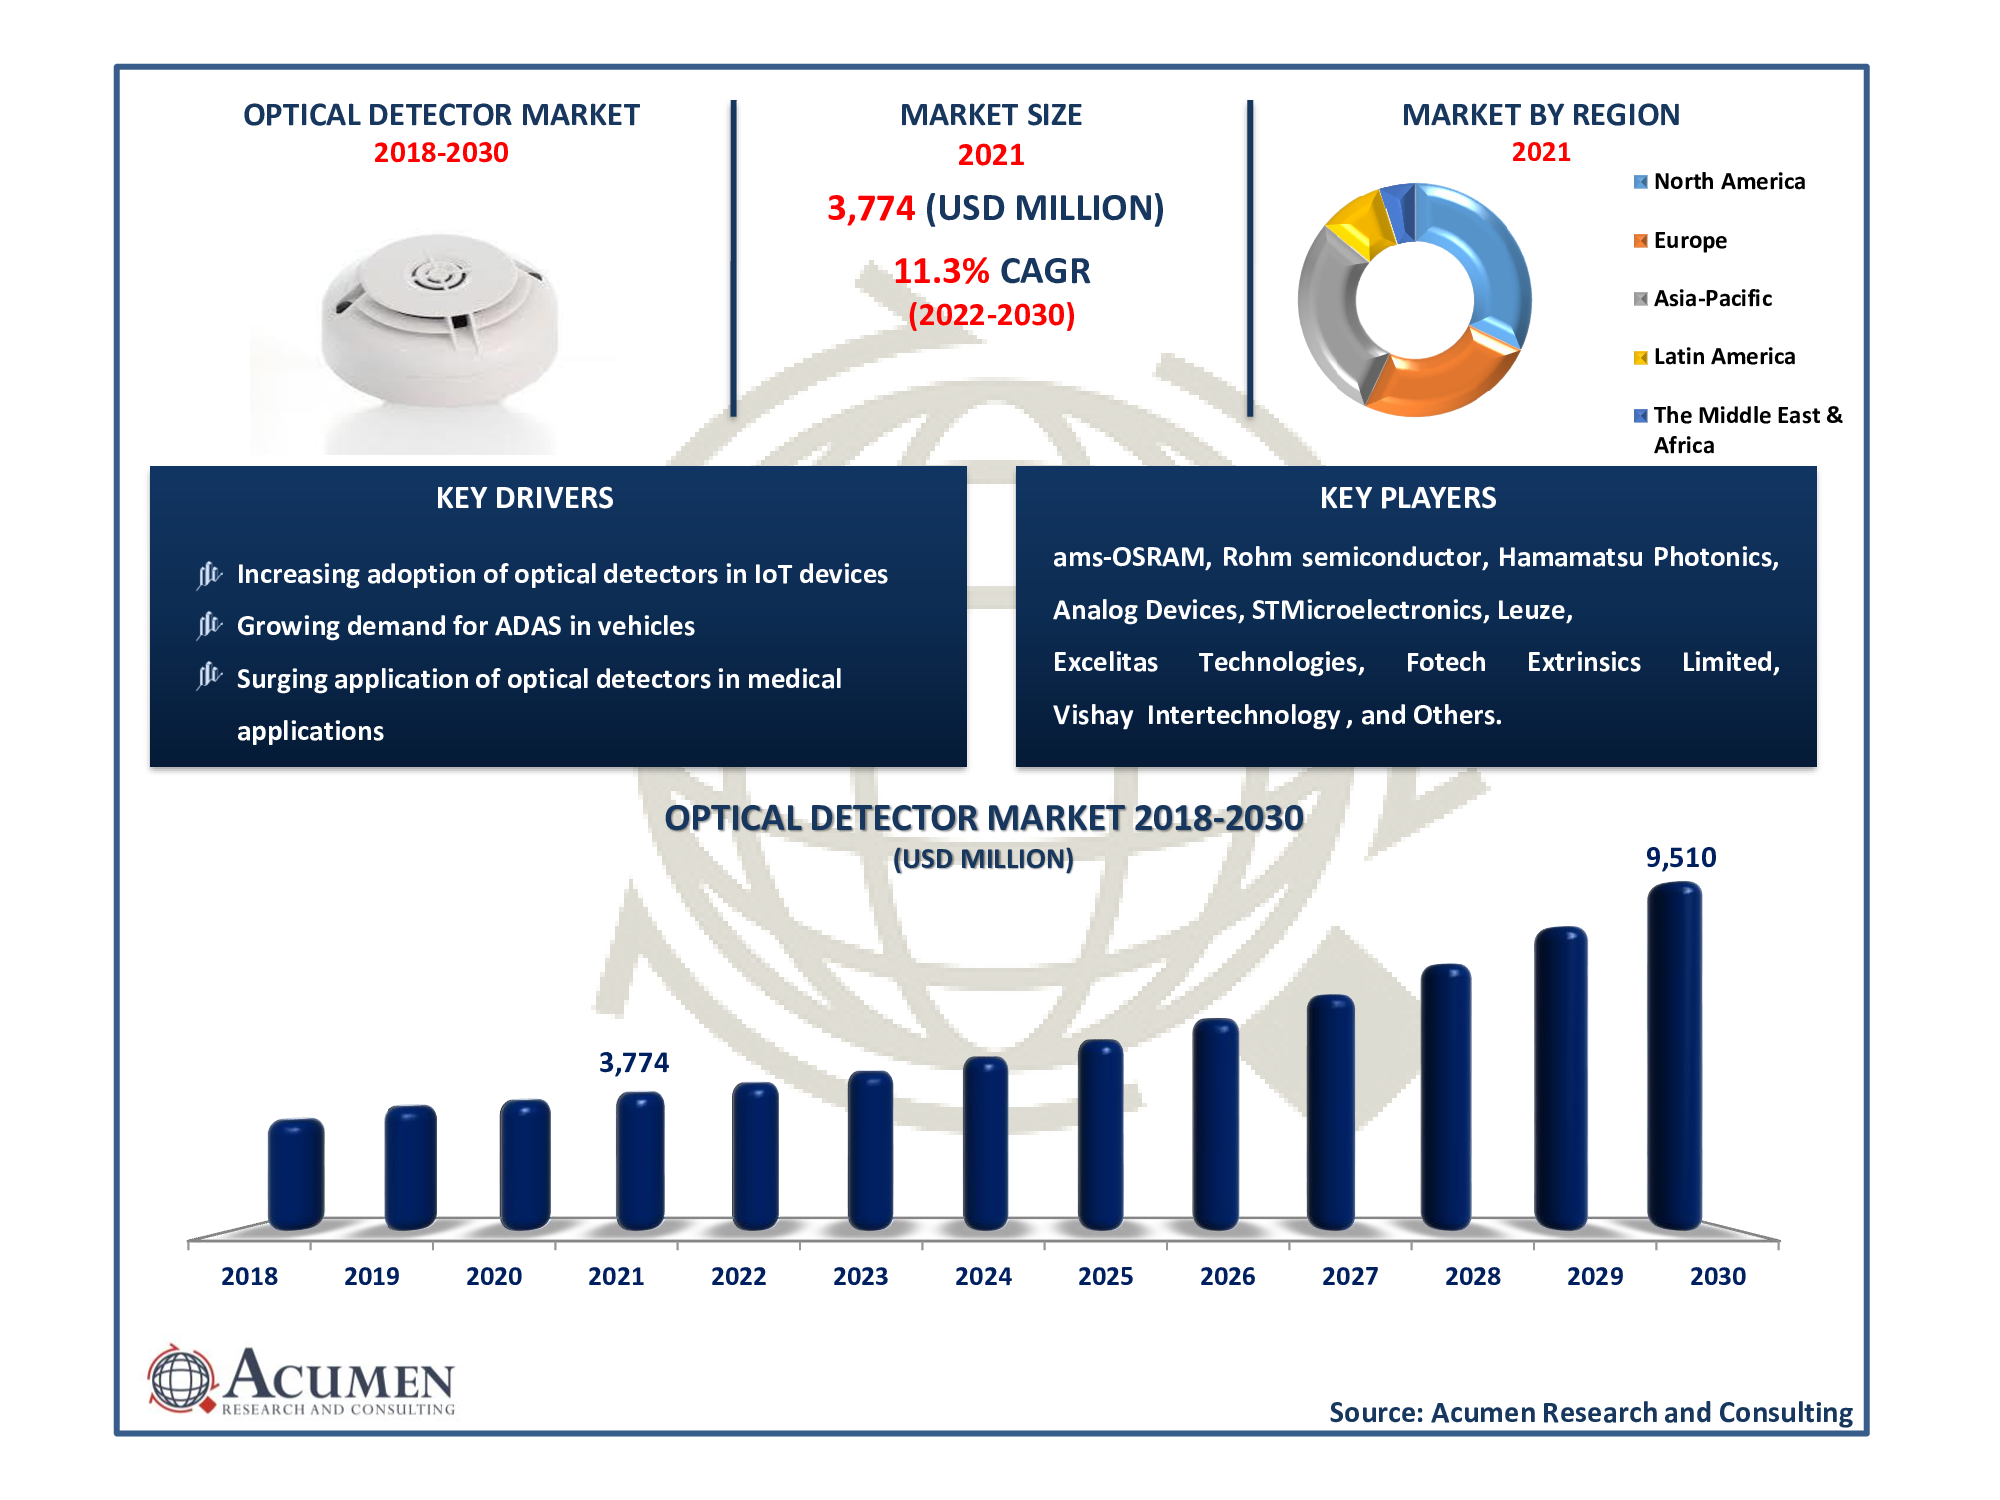 Optical Detector Market size accounted for USD 3,774 Million in 2021 and is projected to reach the value of USD 9,510 Million by 2030, with a significant CAGR of 11.3% from 2022 to 2030.